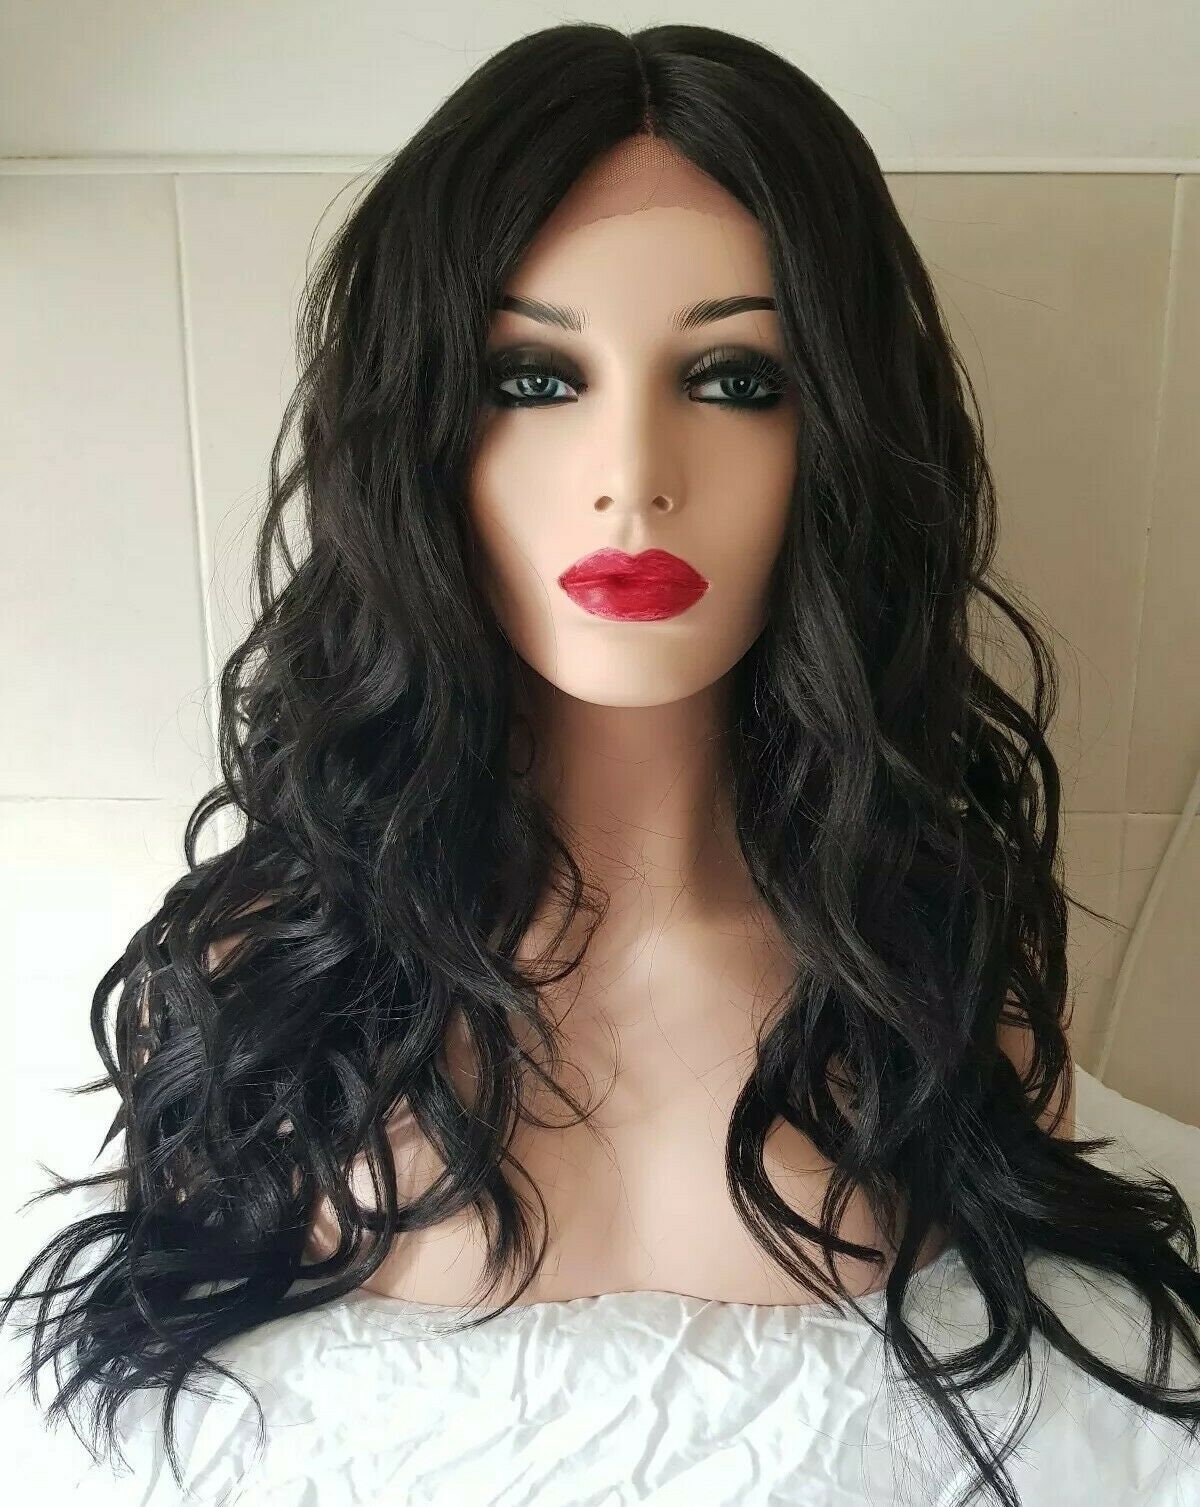 Human Hair Lace Front Wig - the darks